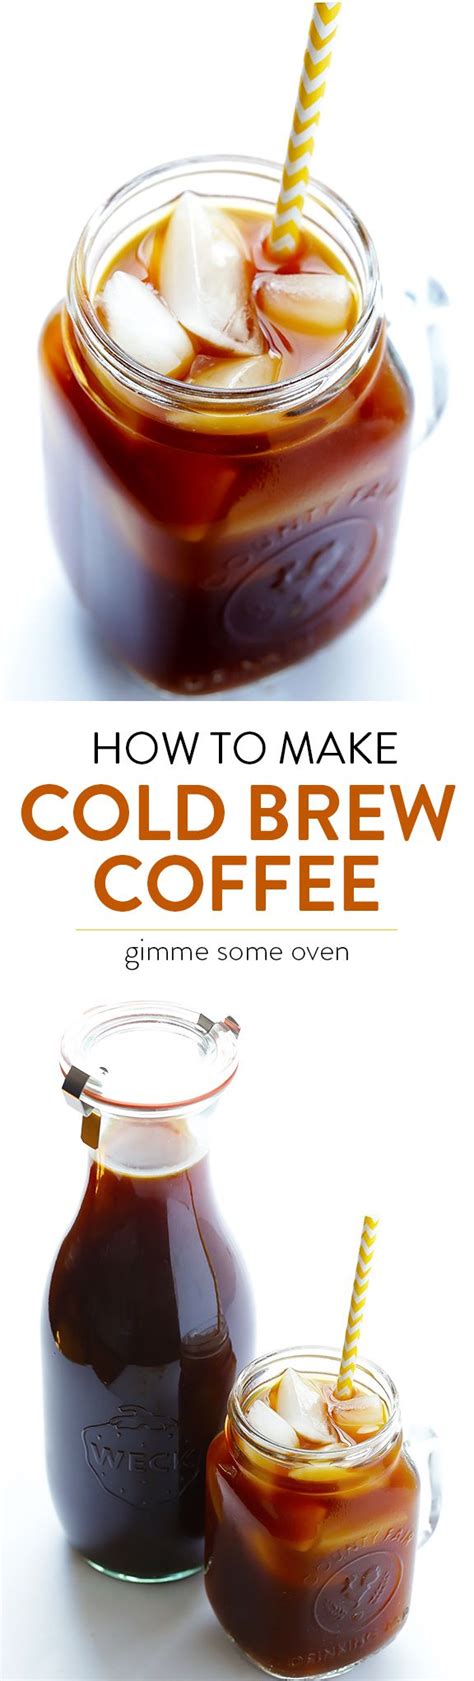 Learn How To Make Cold Brew Coffee With This Step By Step Tutorial And Recipe Its So Easy